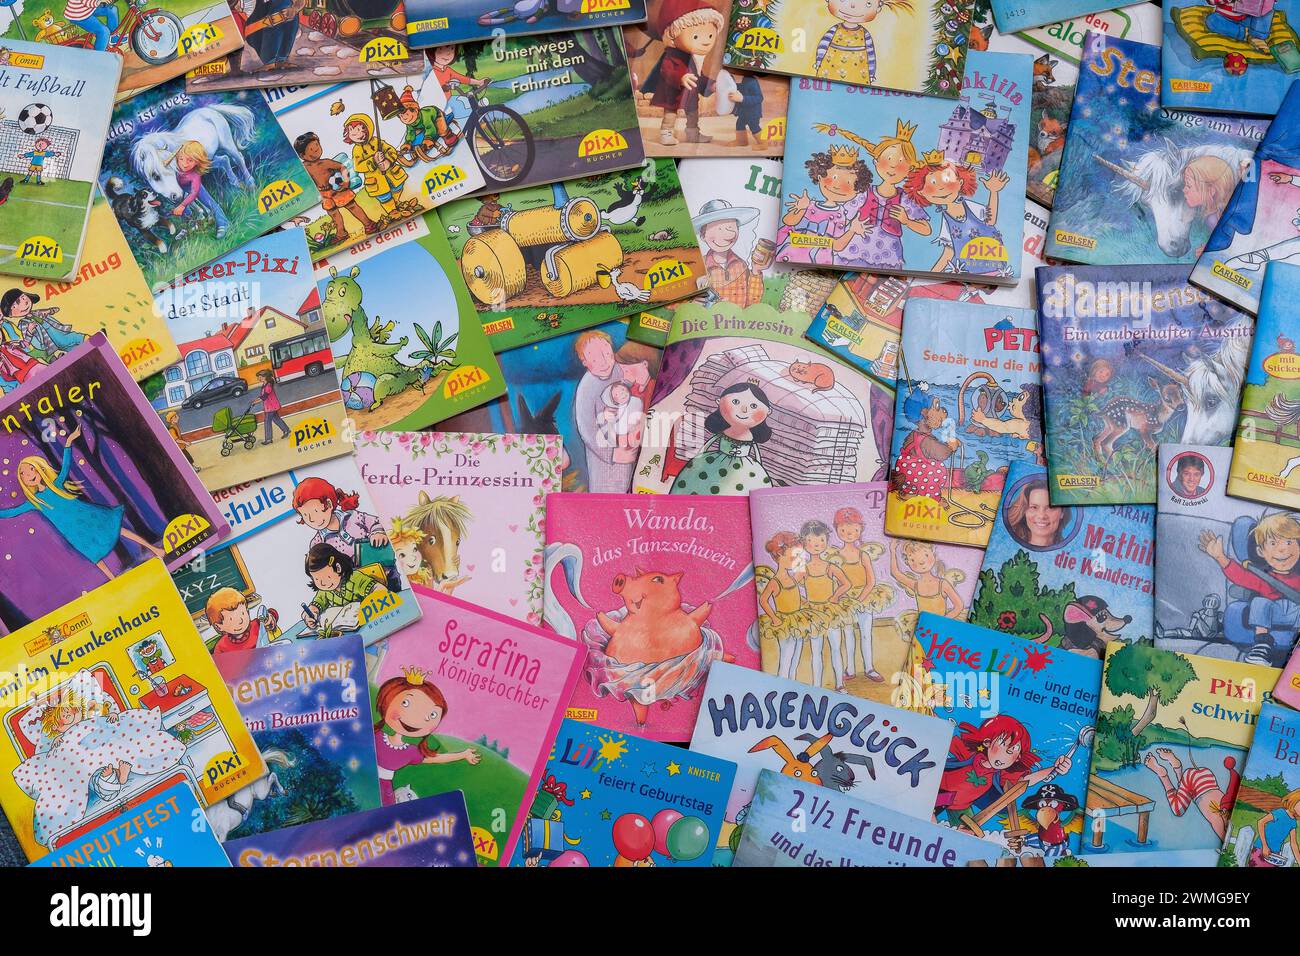 Collection of Pixi books Stock Photo